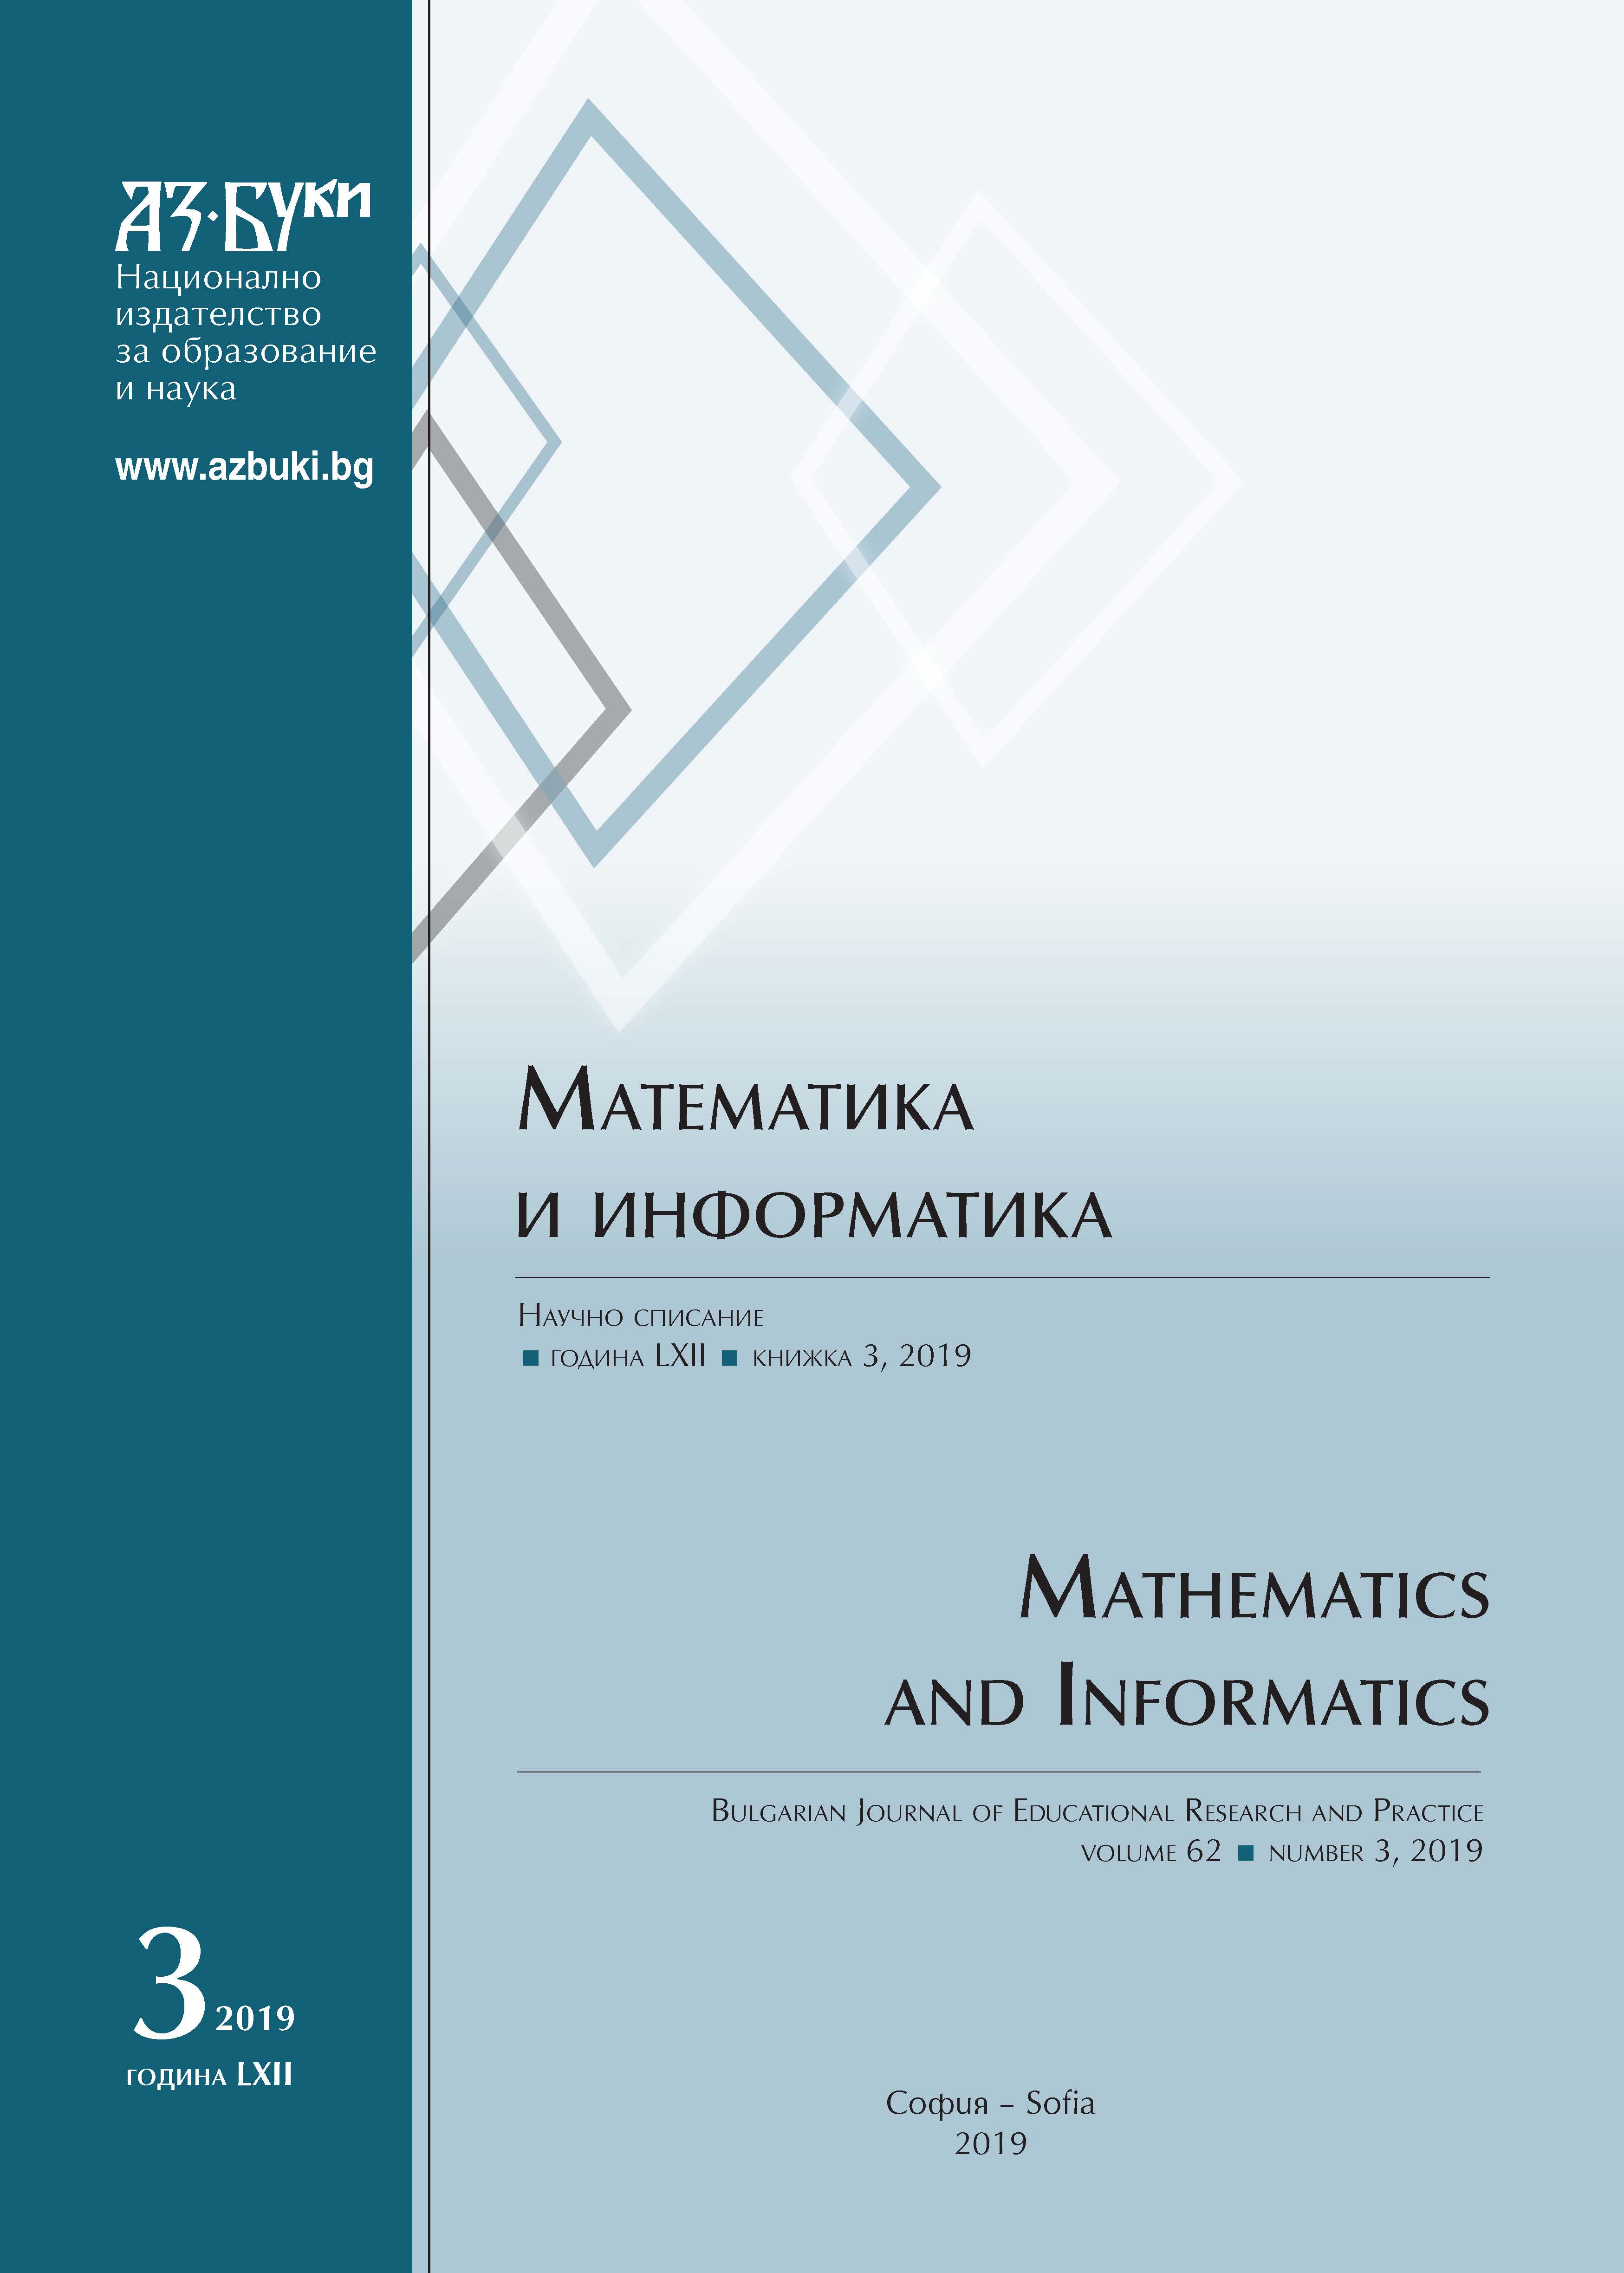 Some Math Quizzes for Presenting a Number by Using Equal Digits and Math Operations Cover Image